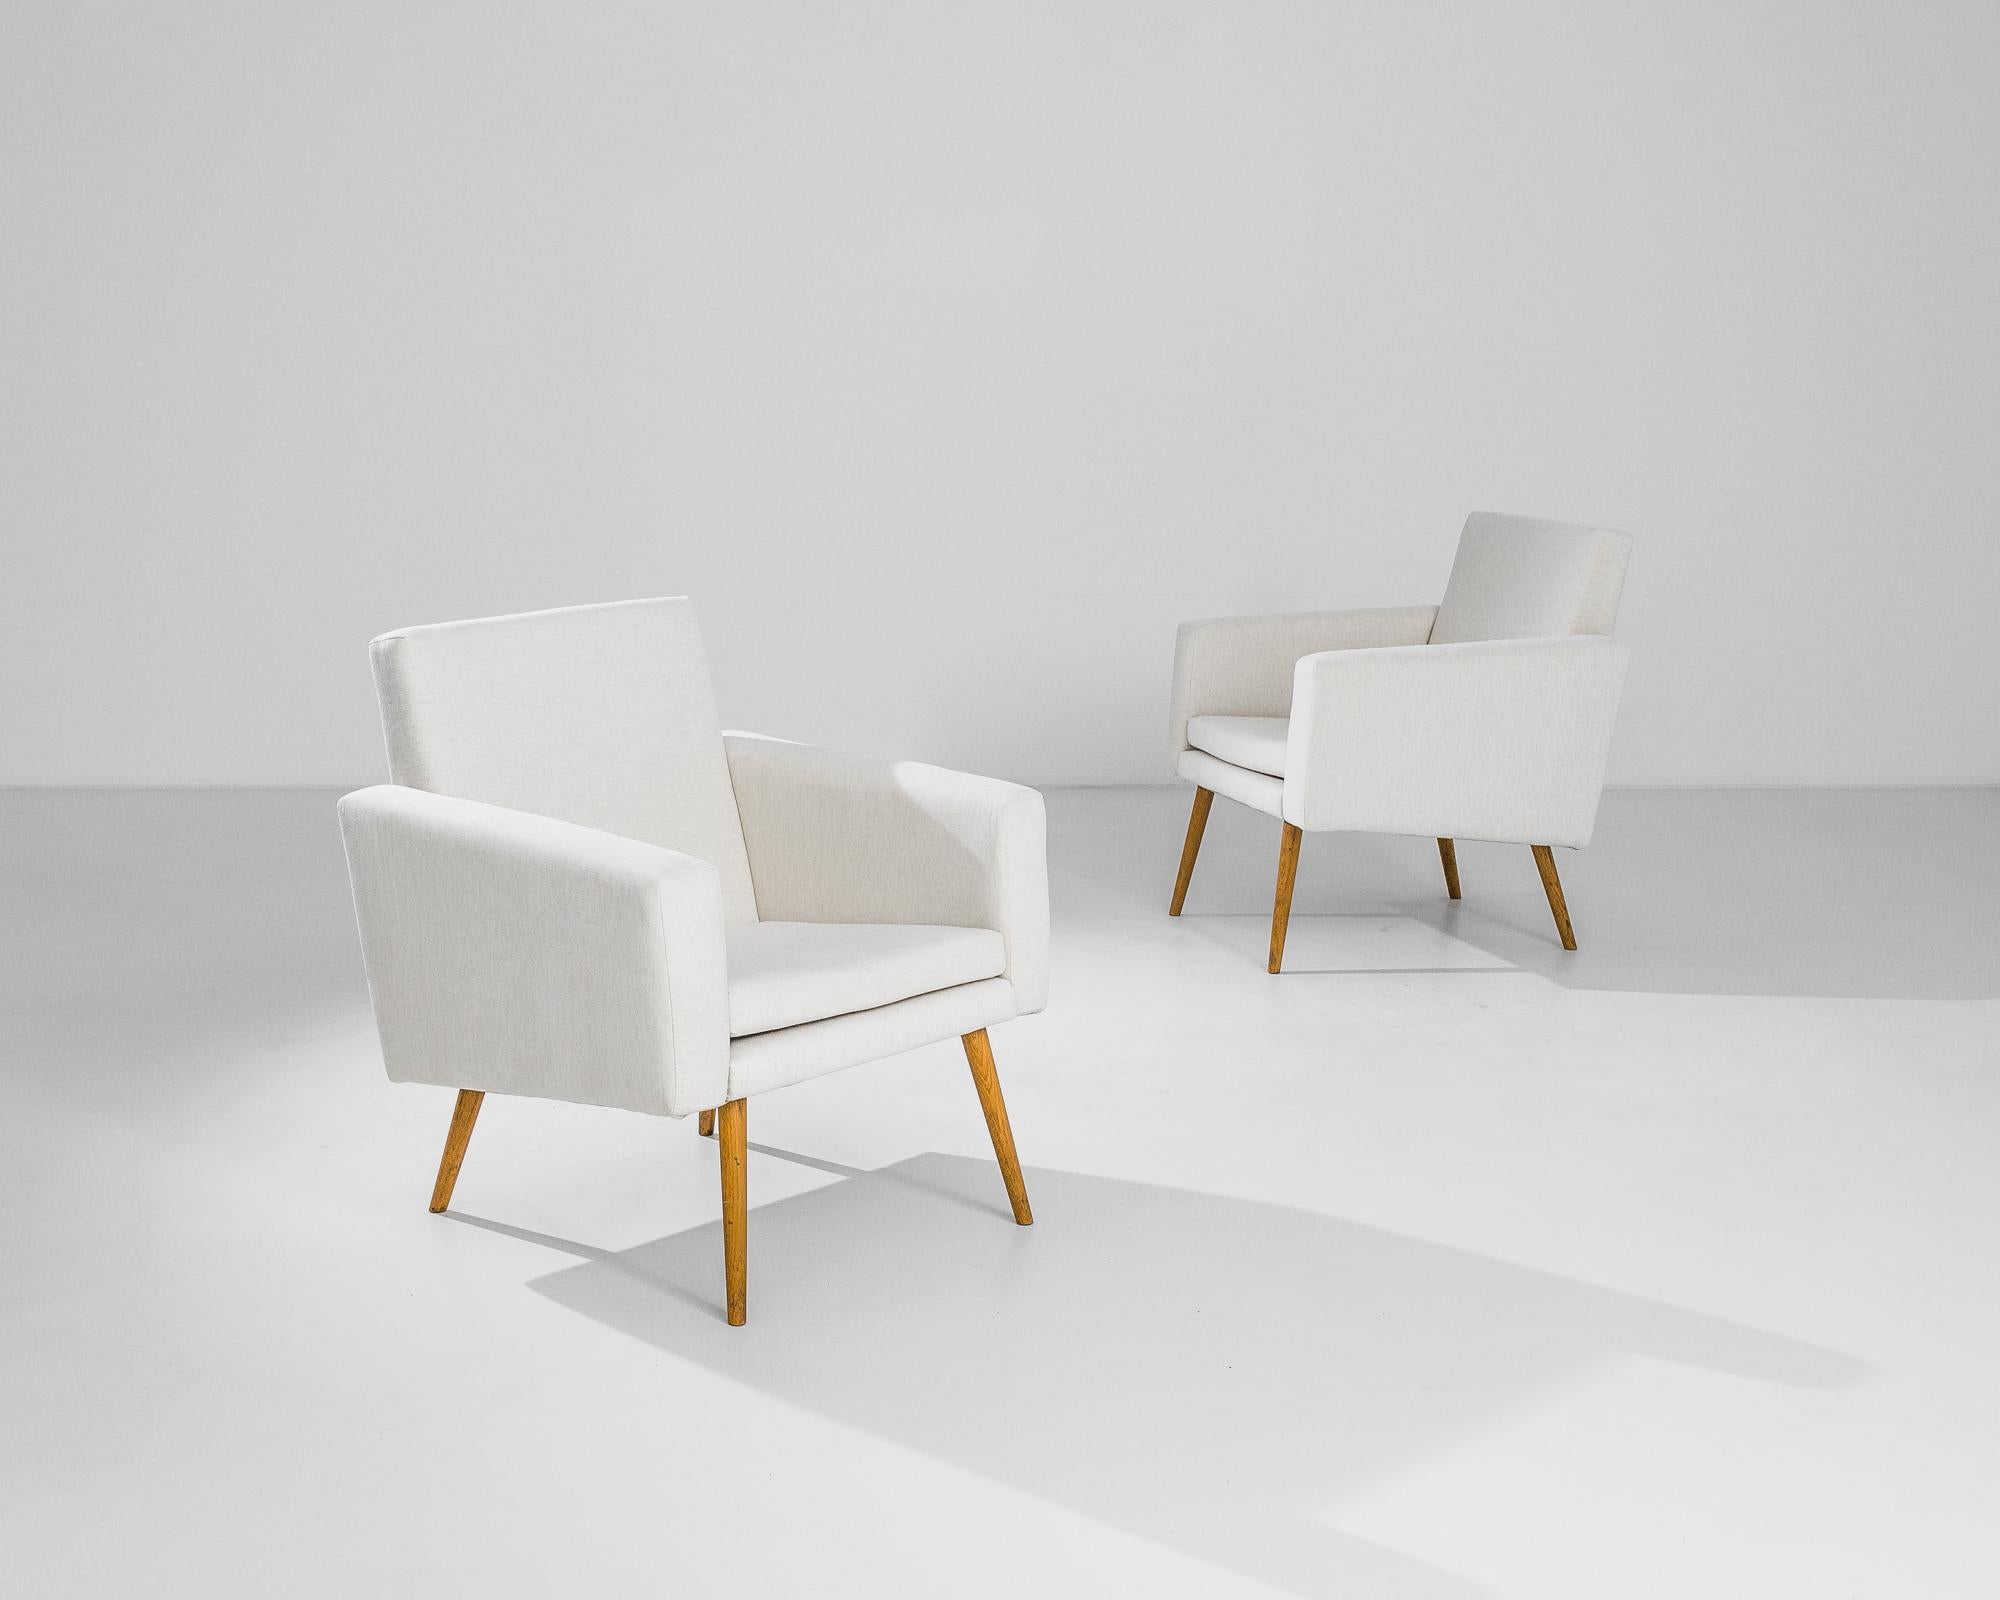 Clean, graphic and sophisticated, this pair of vintage armchairs possess a unique Minimalist silhouette. Made in France in the 1950s, tapered wooden legs offer an agile counterbalance to the boxy profile of the upholstered seat; the angles of the